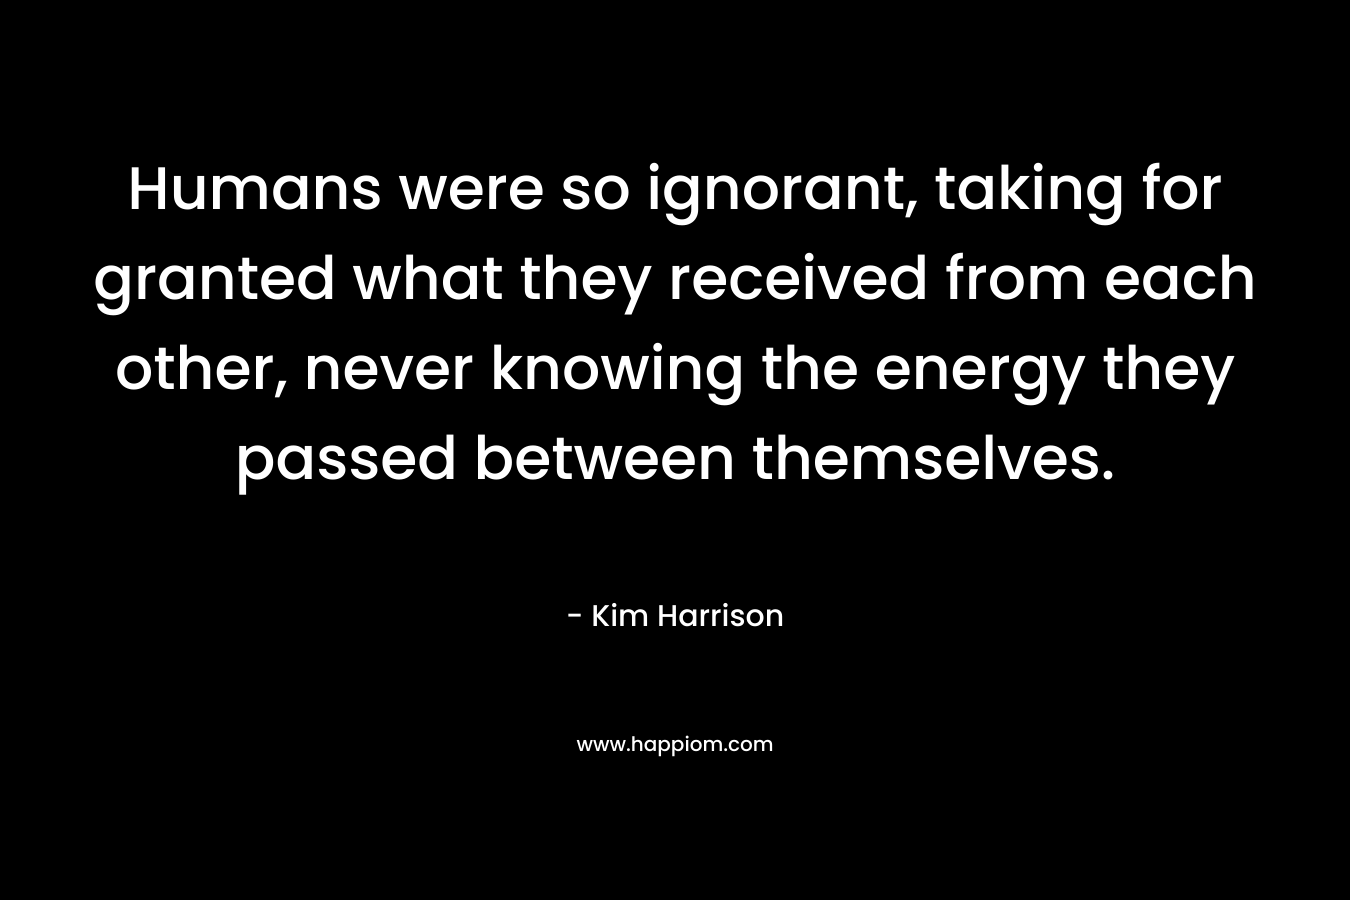 Humans were so ignorant, taking for granted what they received from each other, never knowing the energy they passed between themselves. – Kim Harrison